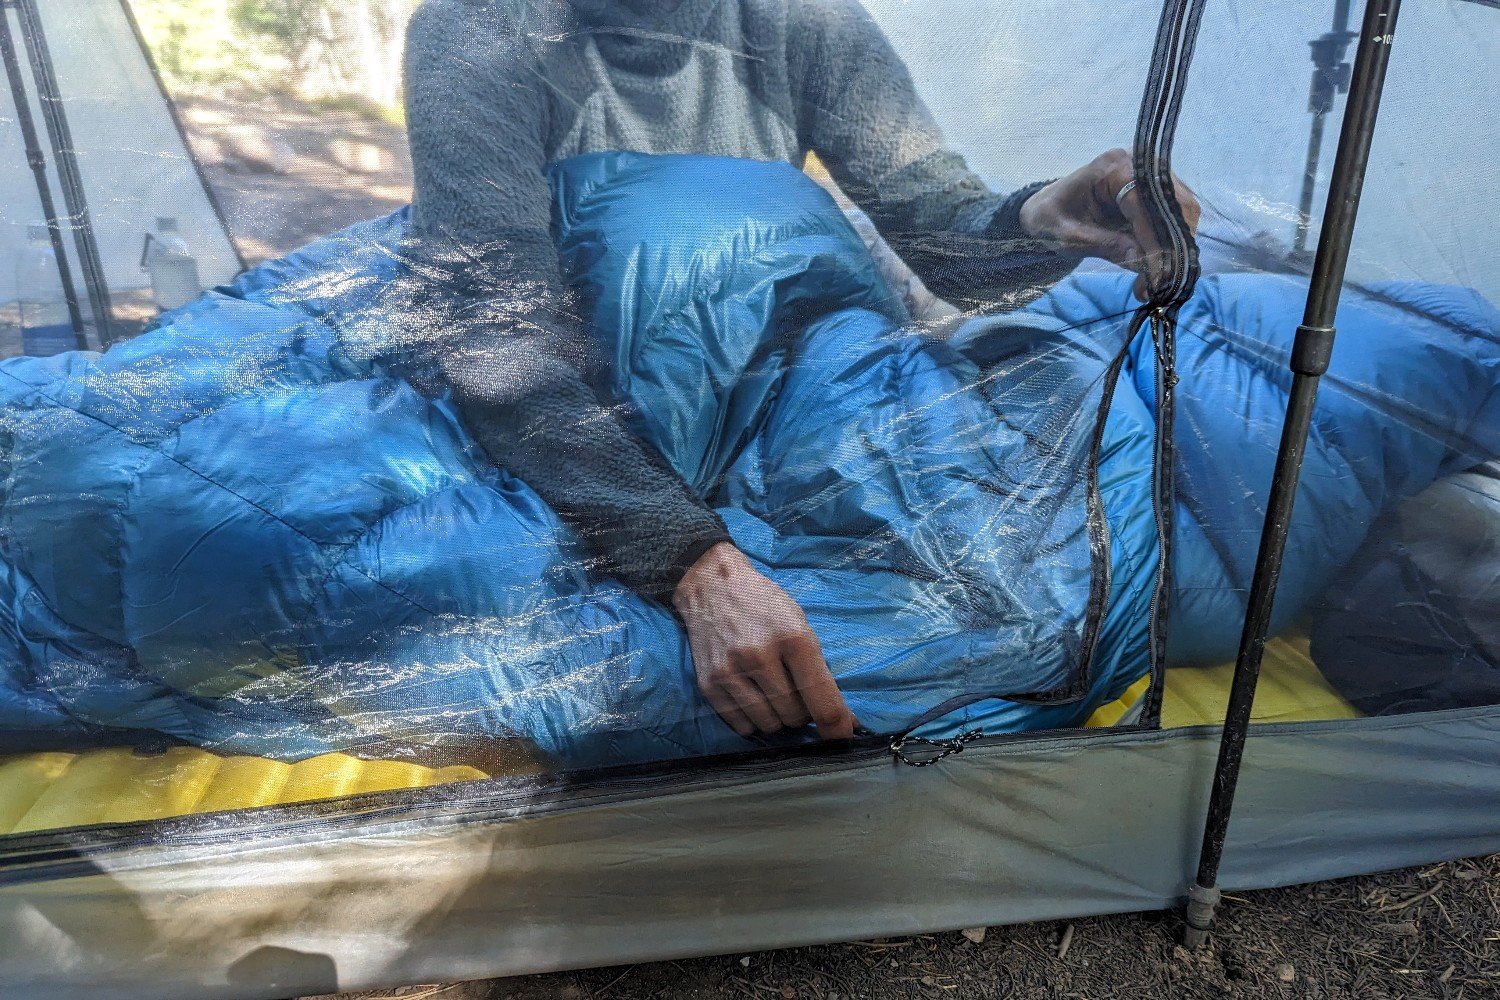 A hiker inside the Durston X-Mid 2 Pro tent opening both of the 90 degree zippers on the door with two hands